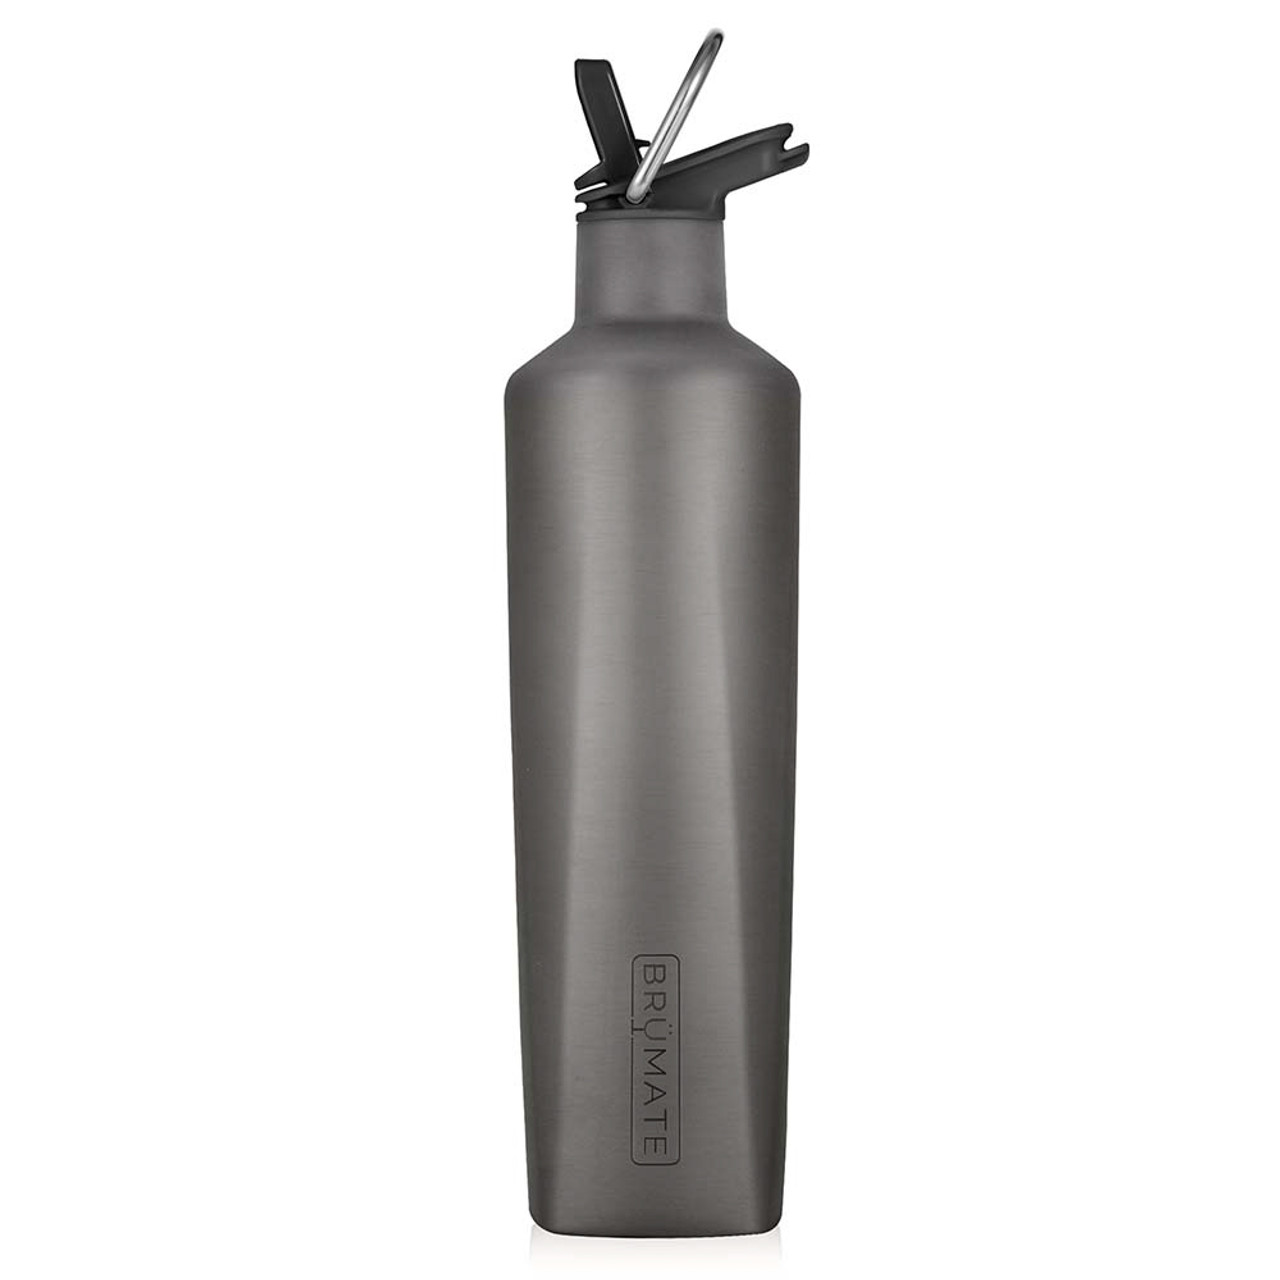 https://cdn11.bigcommerce.com/s-6zwhmb4rdr/images/stencil/1280x1280/products/76411/200399/the-lamp-stand-brumate-black-stainless-rehydration-bottle-RH25BS__87658.1649925526.jpg?c=1